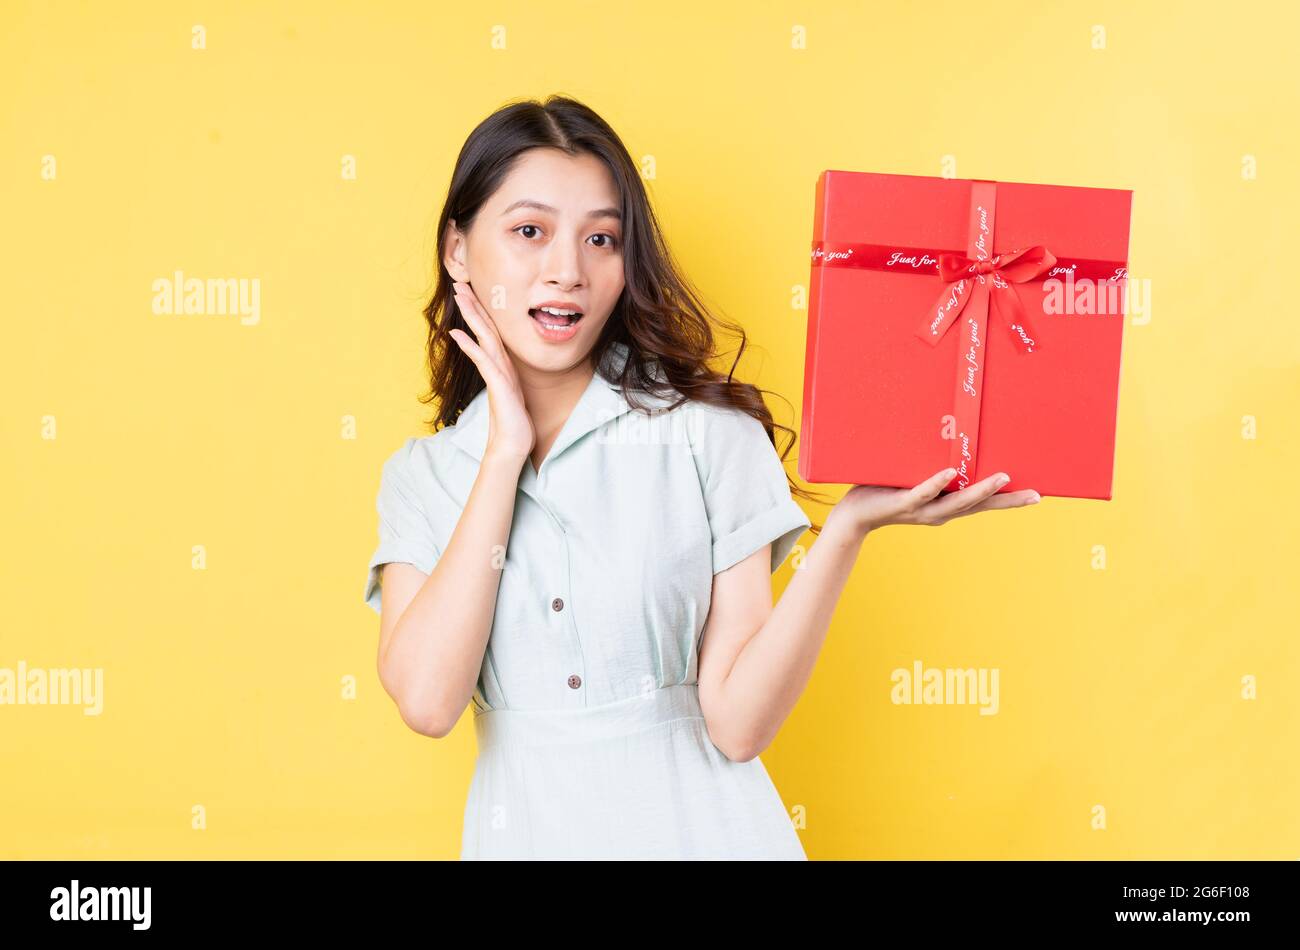 portrait of asian woman holding gift box Stock Photo